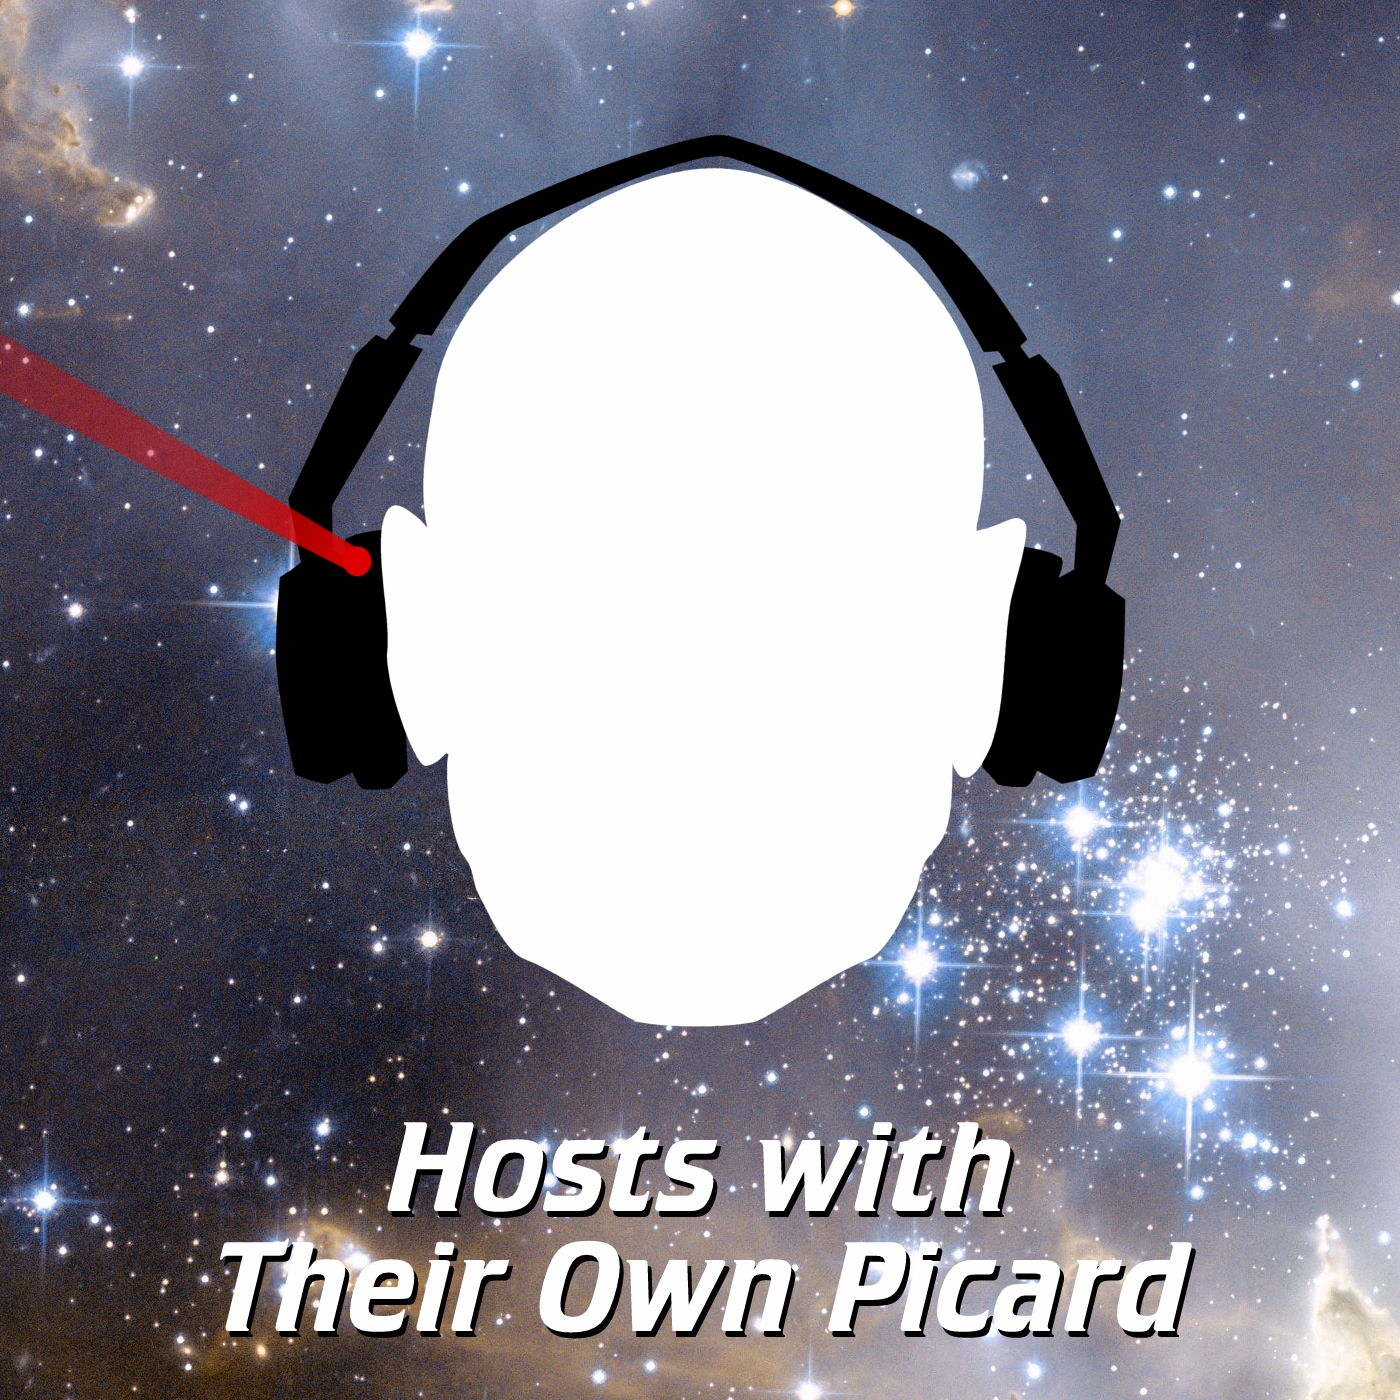 Hosts with Their Own Picard Podcast Episode 9 – S1E6 – The Impossible Box